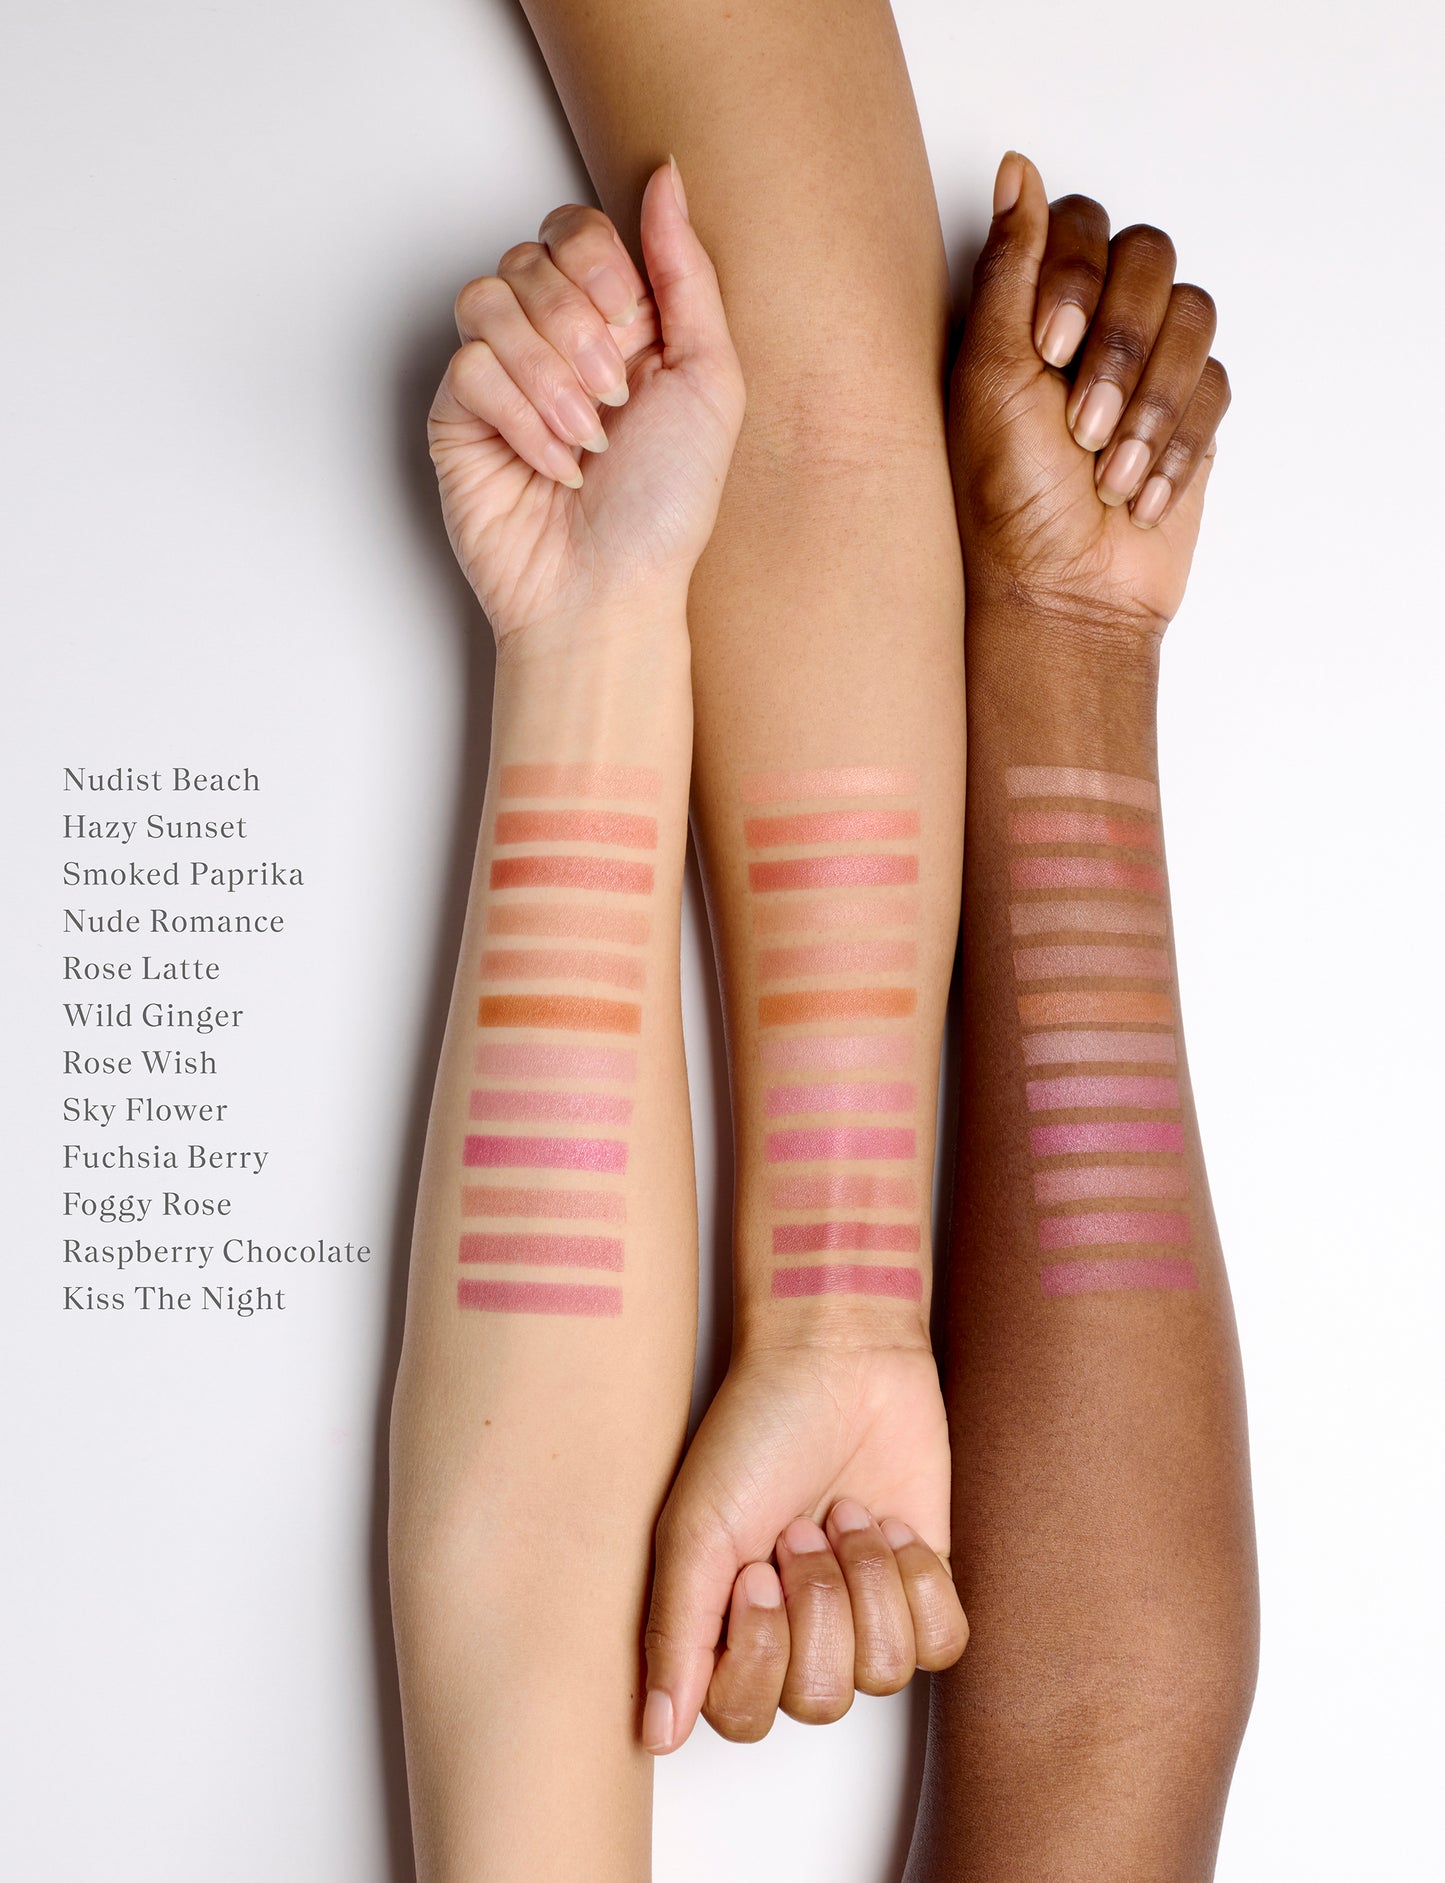 Three arms lined up next to each other with cream blush swatches on the skin. There are twelve swatch stripes on each of the three arms. The arm on the left is fair, the middle is golden and the arm on the right is deep. Their nails are unpainted and their hands are semi-closed in a relaxed state.